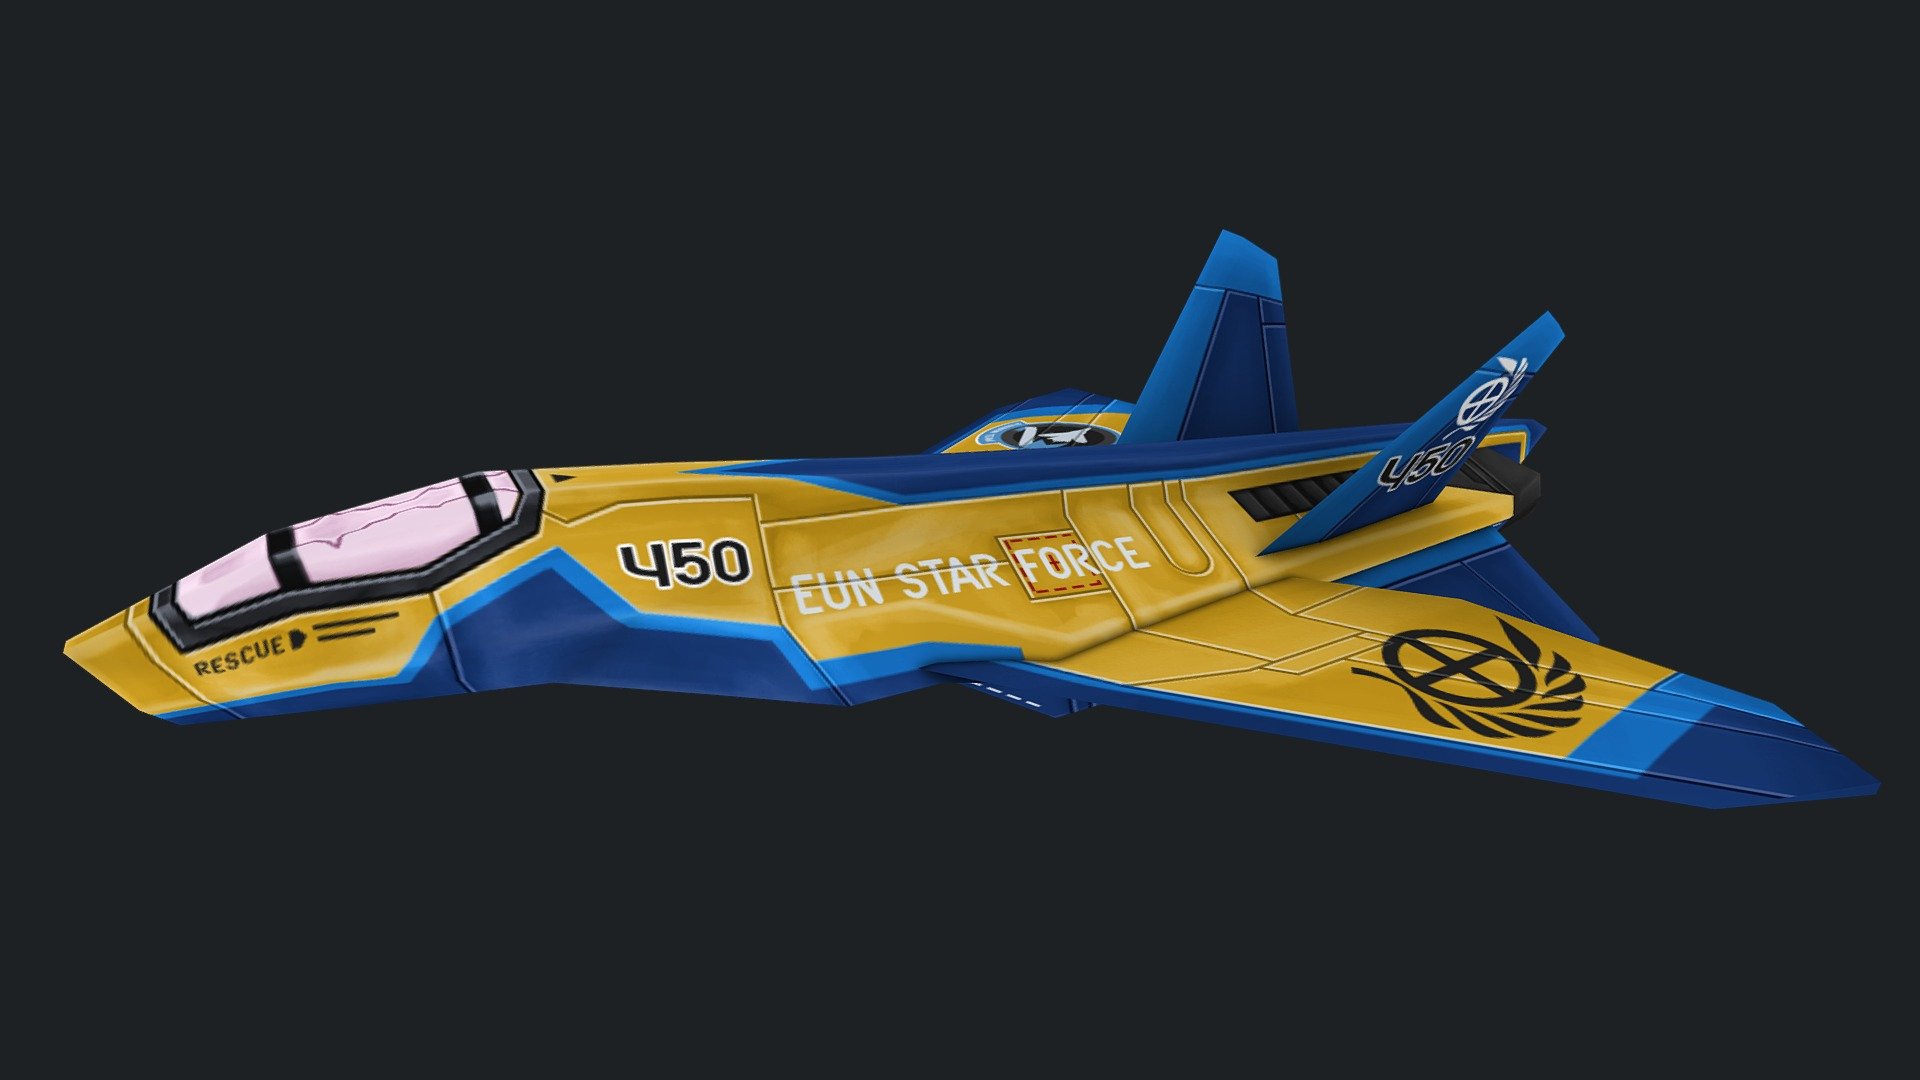 A low-poly racing ship as a mod for the game &lsquo;BallisticNG'. Stylistically, it is inspired by the racing craft in &lsquo;WipEout Pure'.

Design-wise, the inspiration will be obvious to fans of a certain game series, as I have put some pretty big references into the livery 3d model